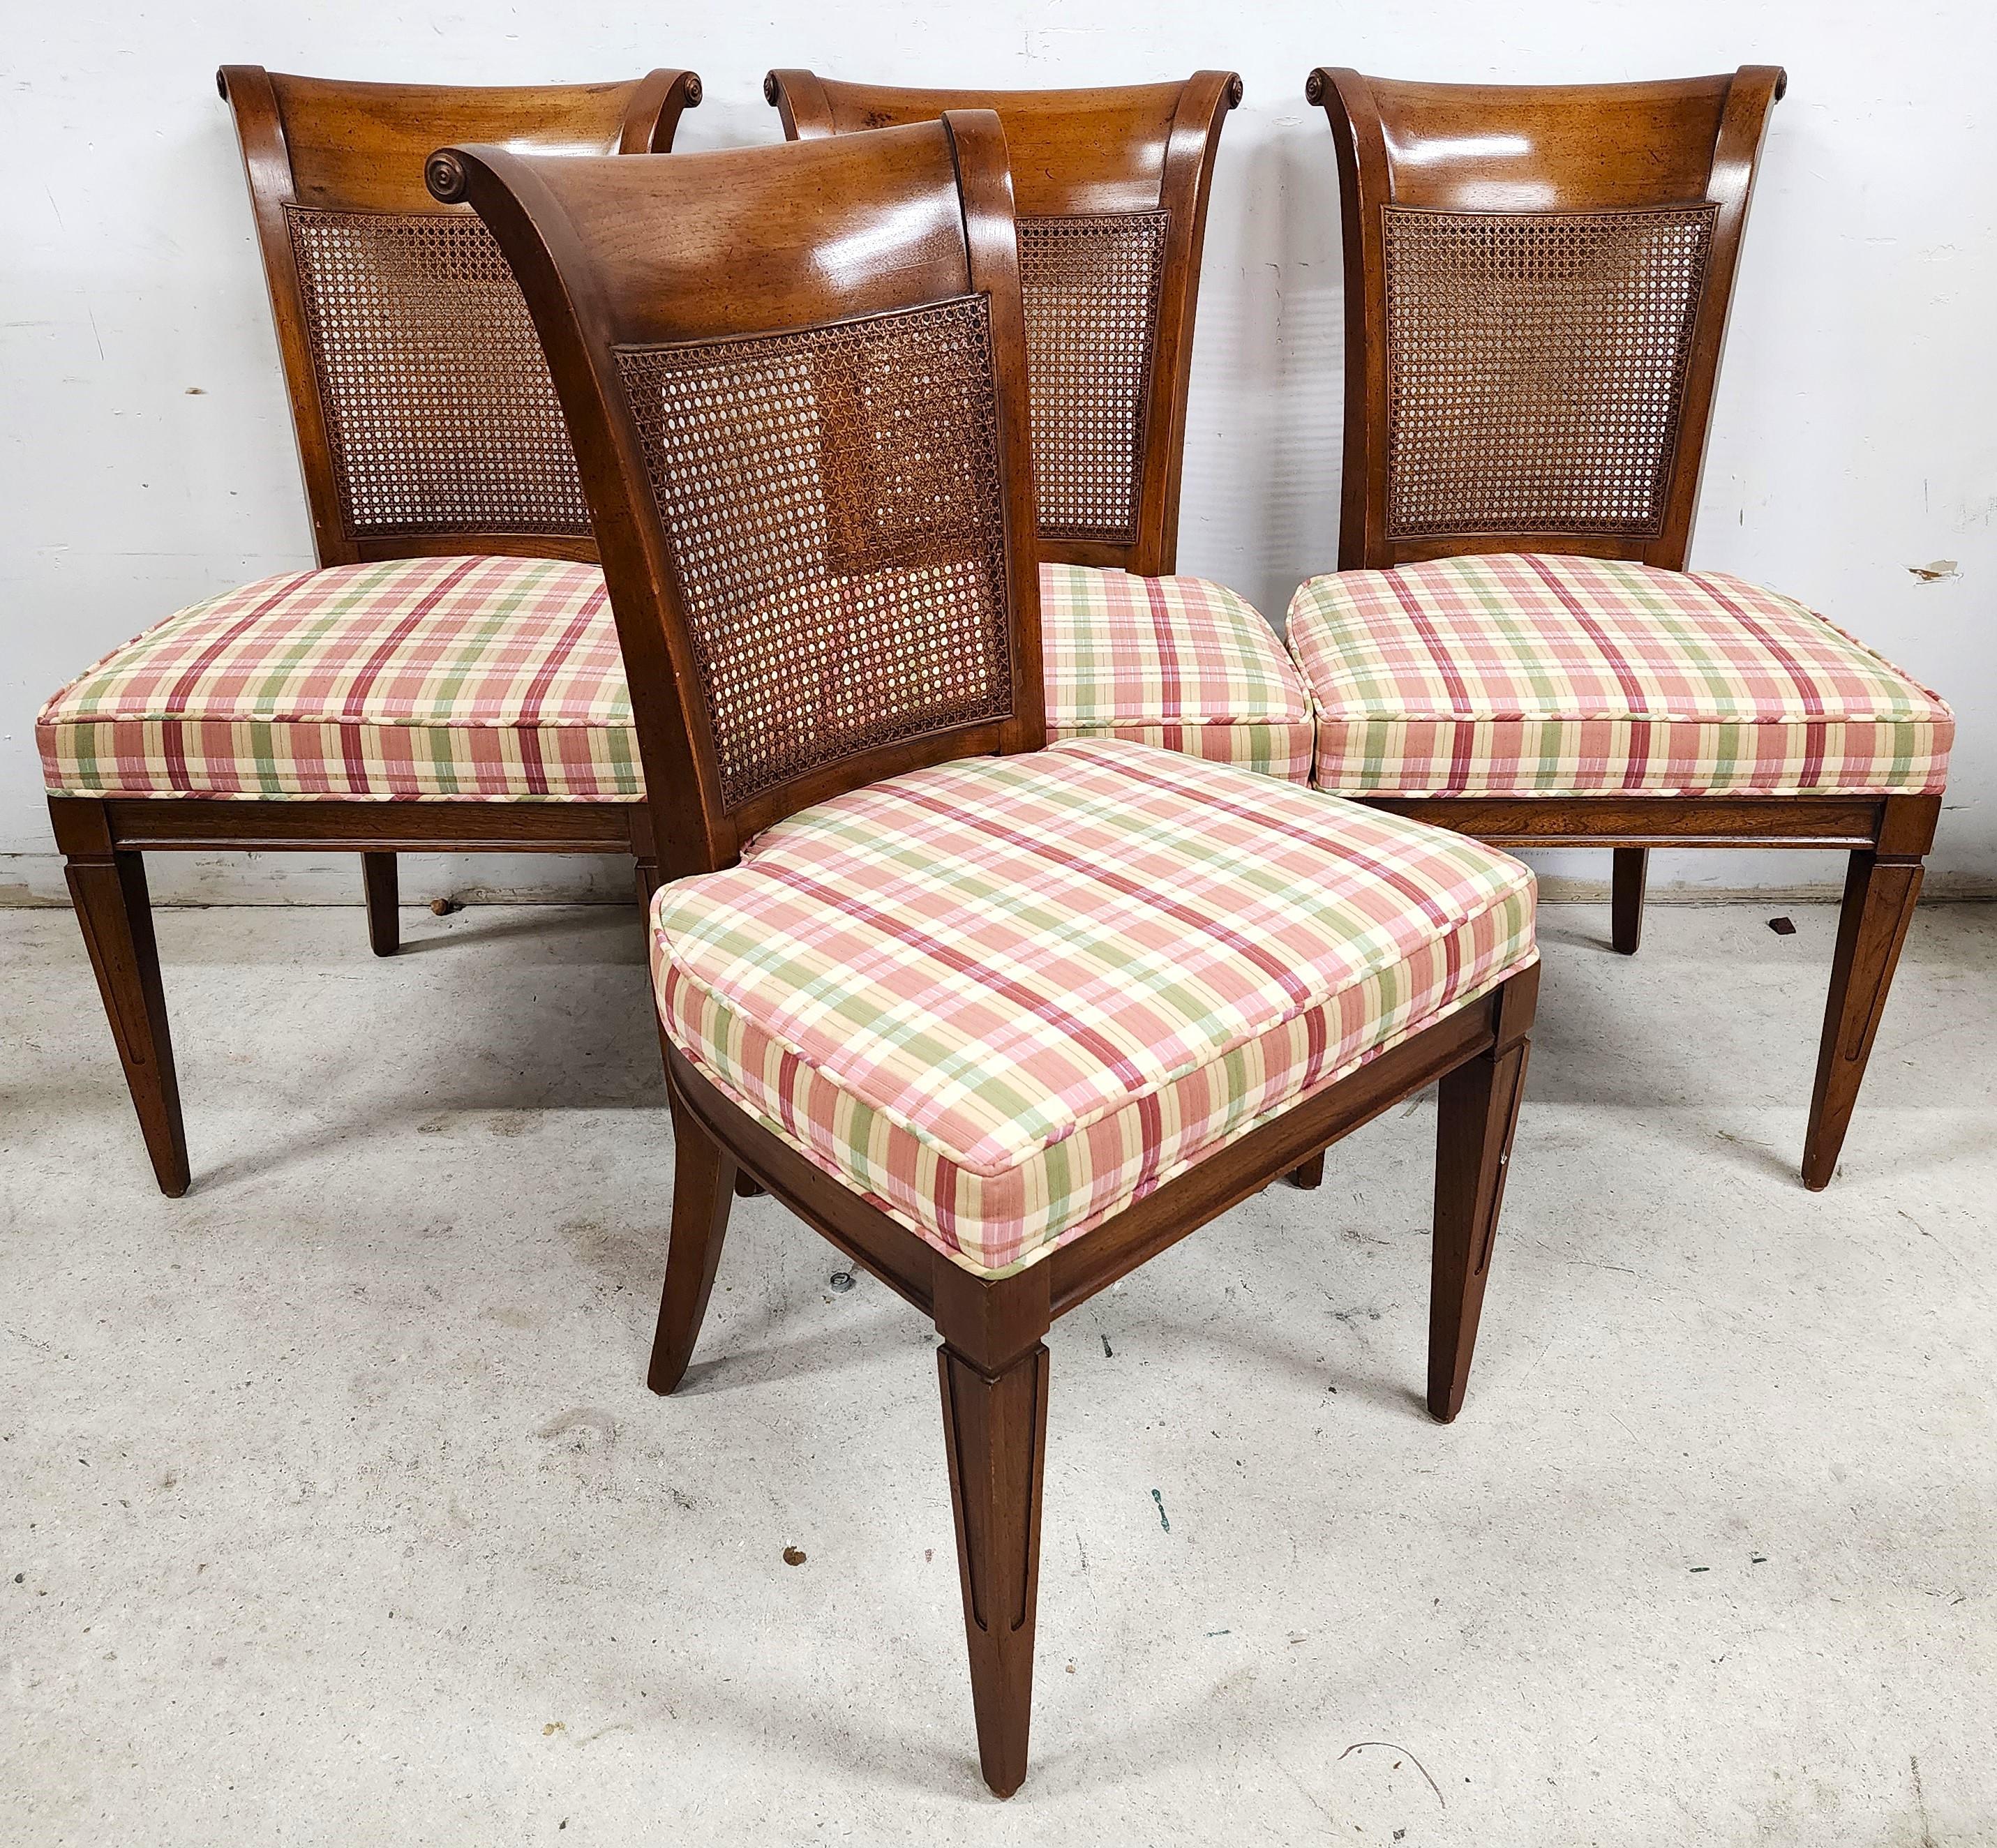 For FULL item description click on CONTINUE READING at the bottom of this page.

Offering One Of Our Recent Palm Beach Estate Fine Furniture Acquisitions Of A
Set of 4 Louis XVI Style Caned Back Dining Chairs Made of Solid Cherry
Exceptionally